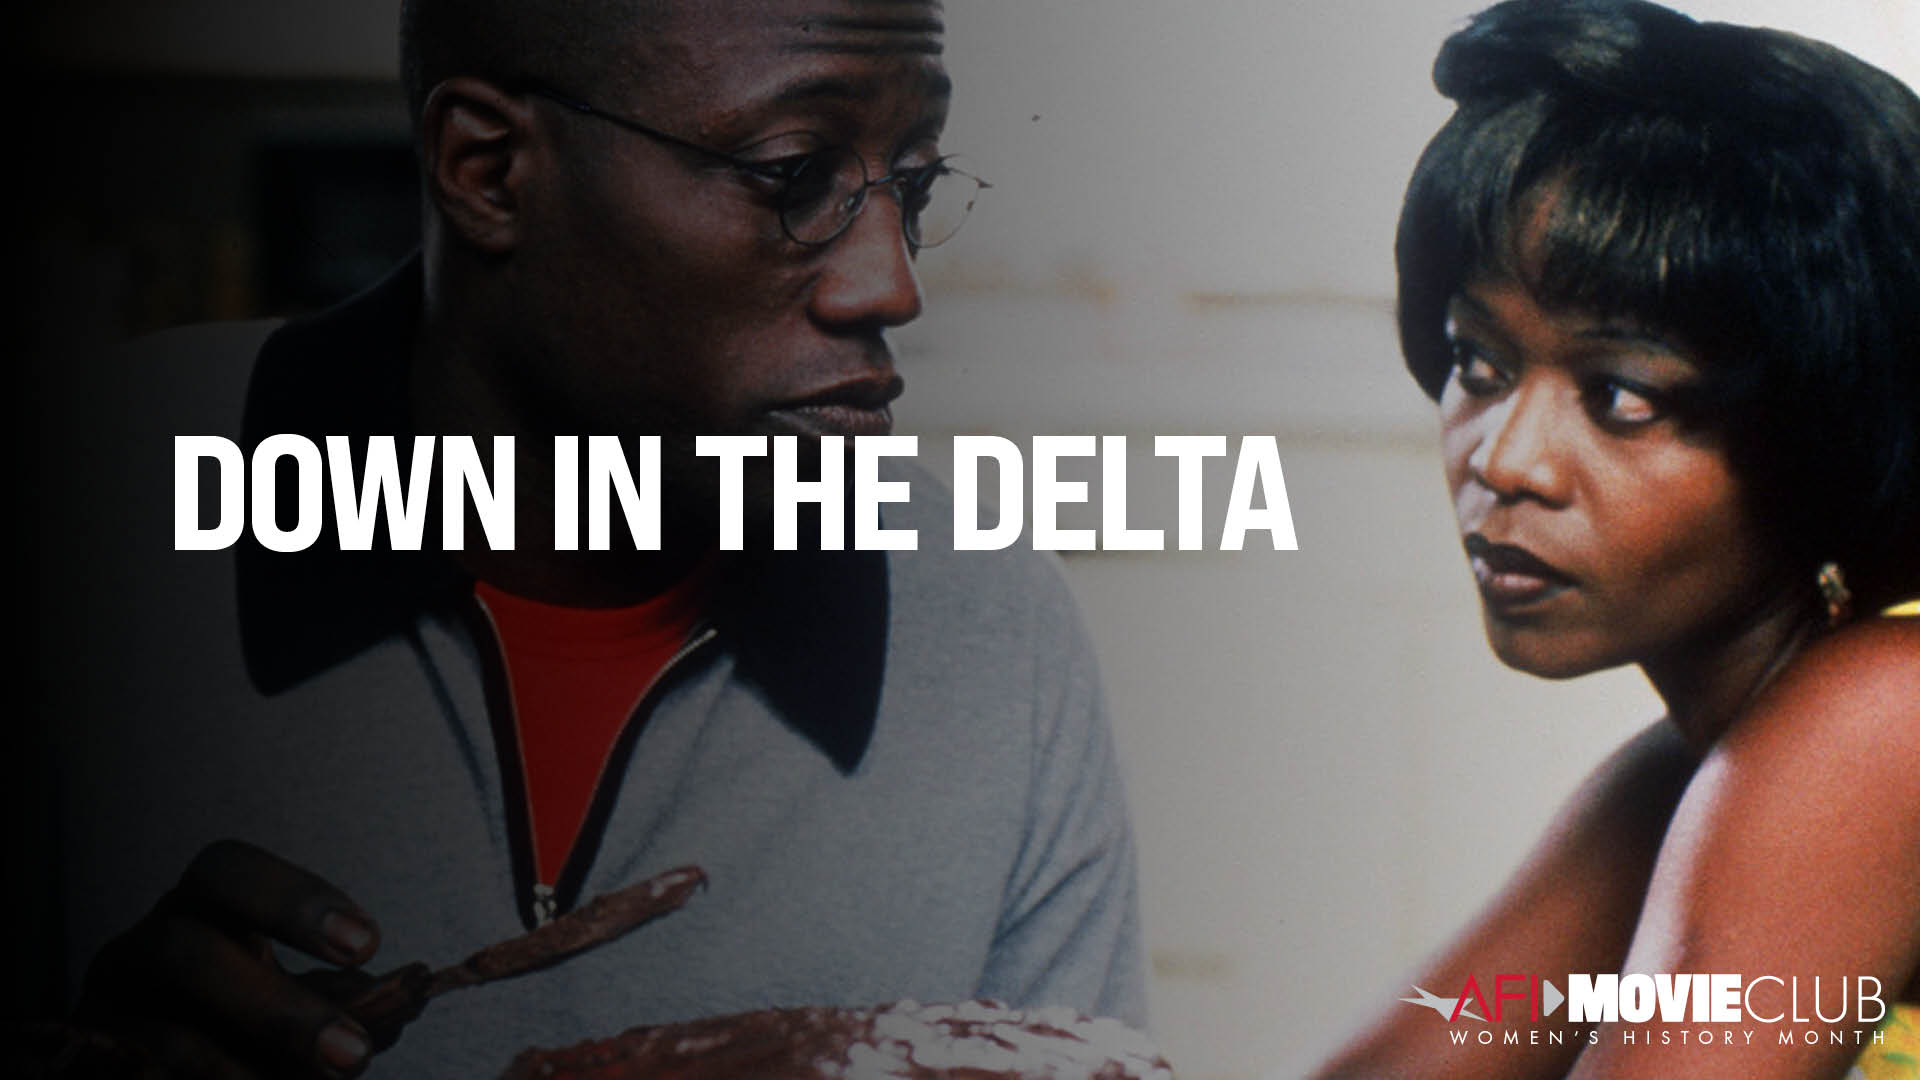 Down in the Delta Film Still - Wesley Snipes and Alfre Woodard